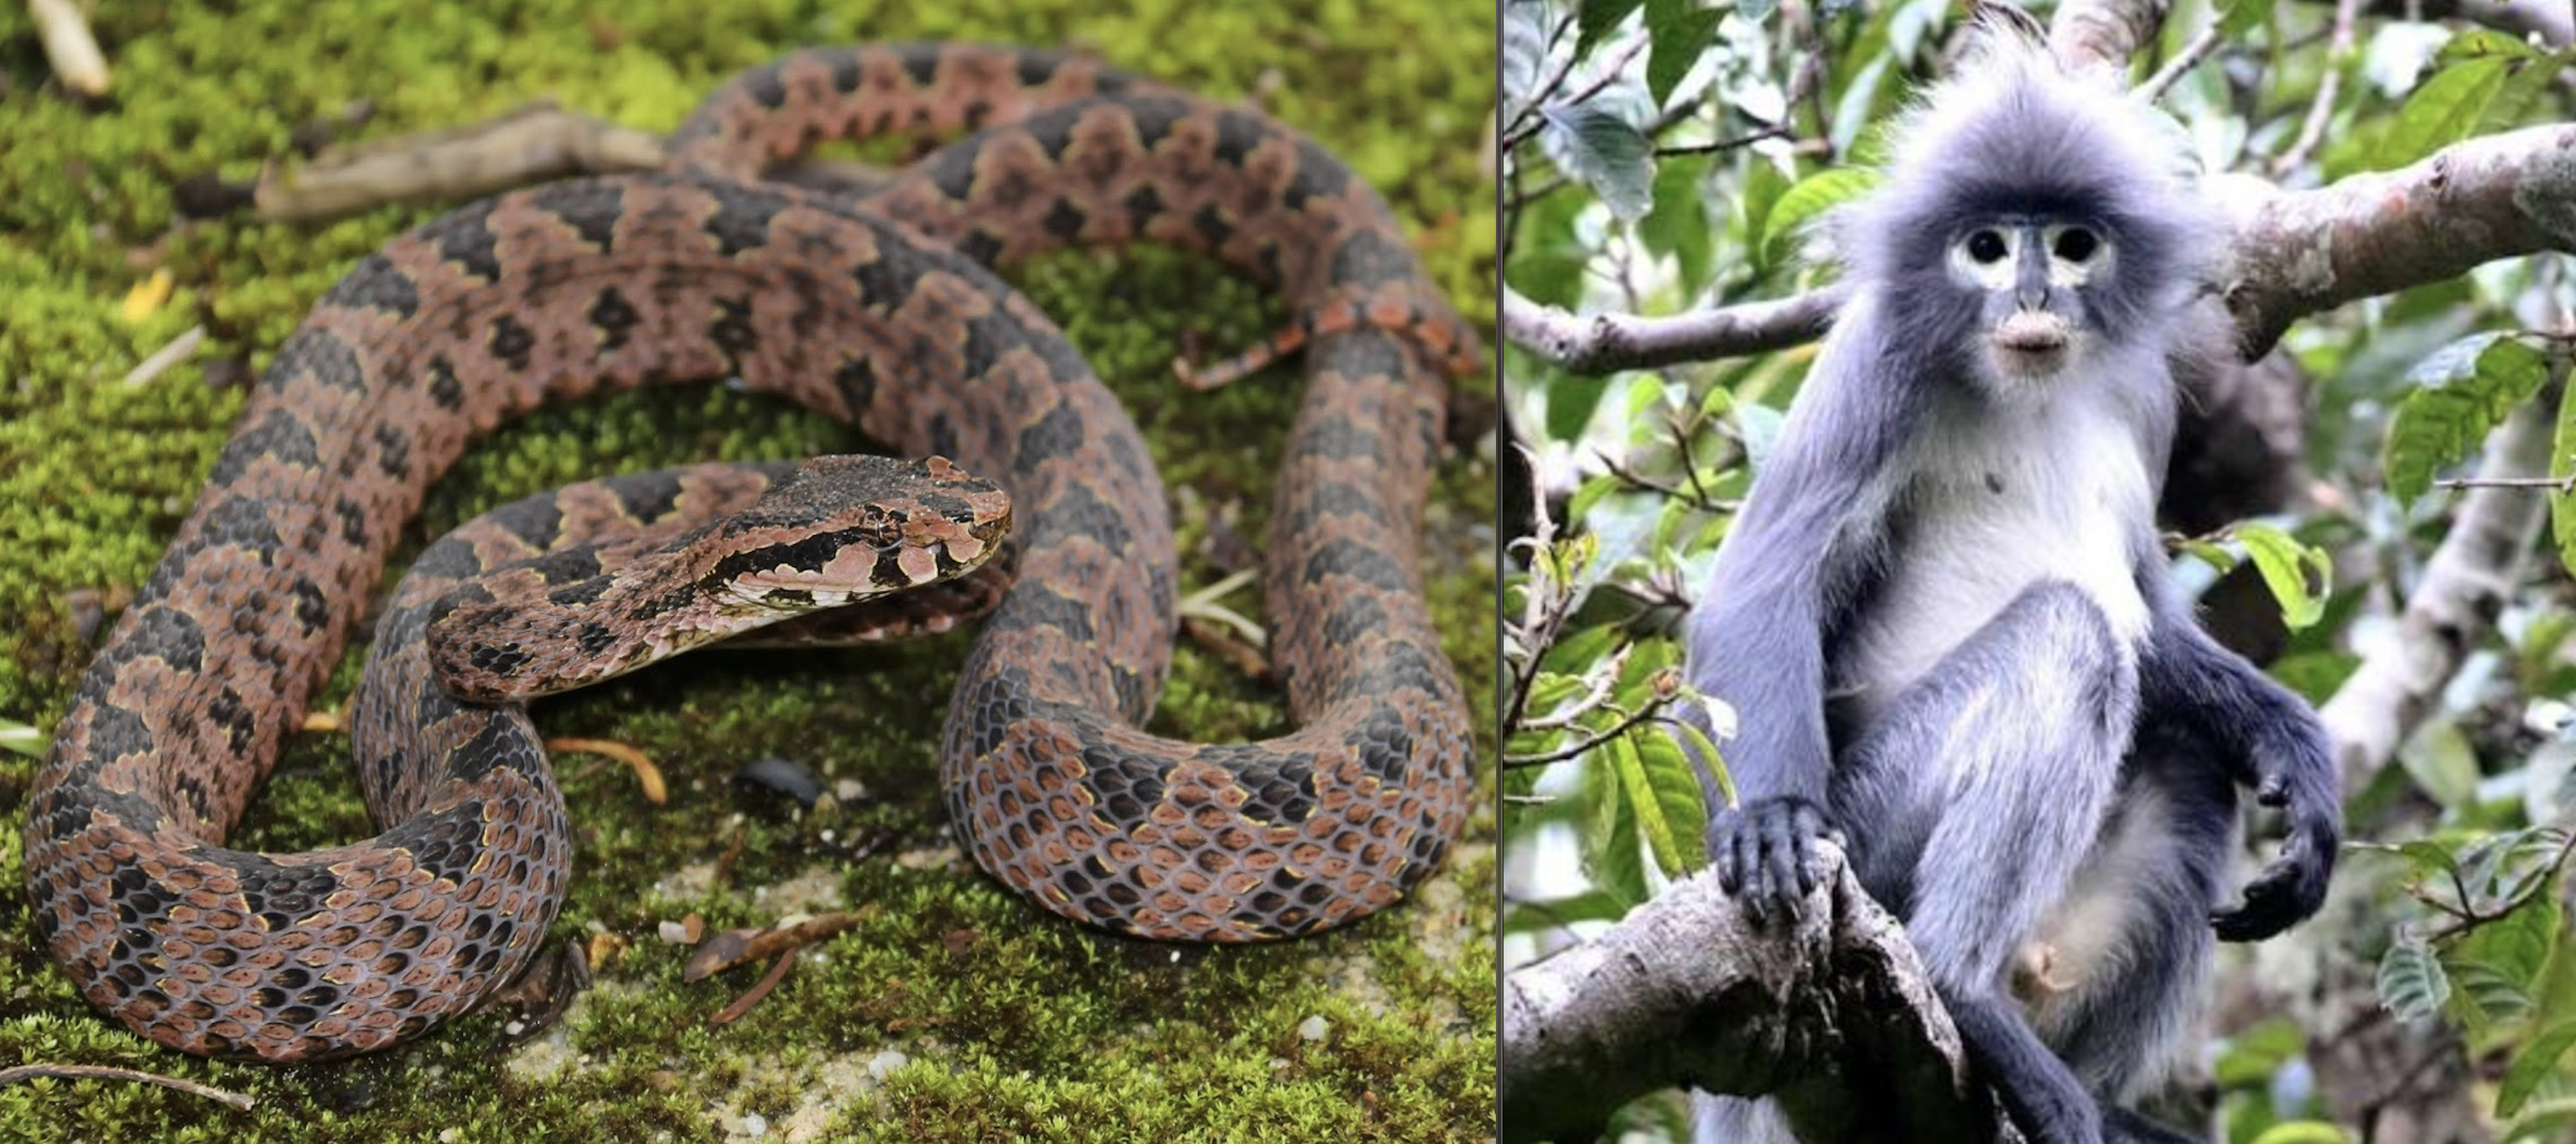 WWF Report: 224 New Species Found in Greater Mekong Region, Including a Totally Rad Monkey and a Large Pit Viper